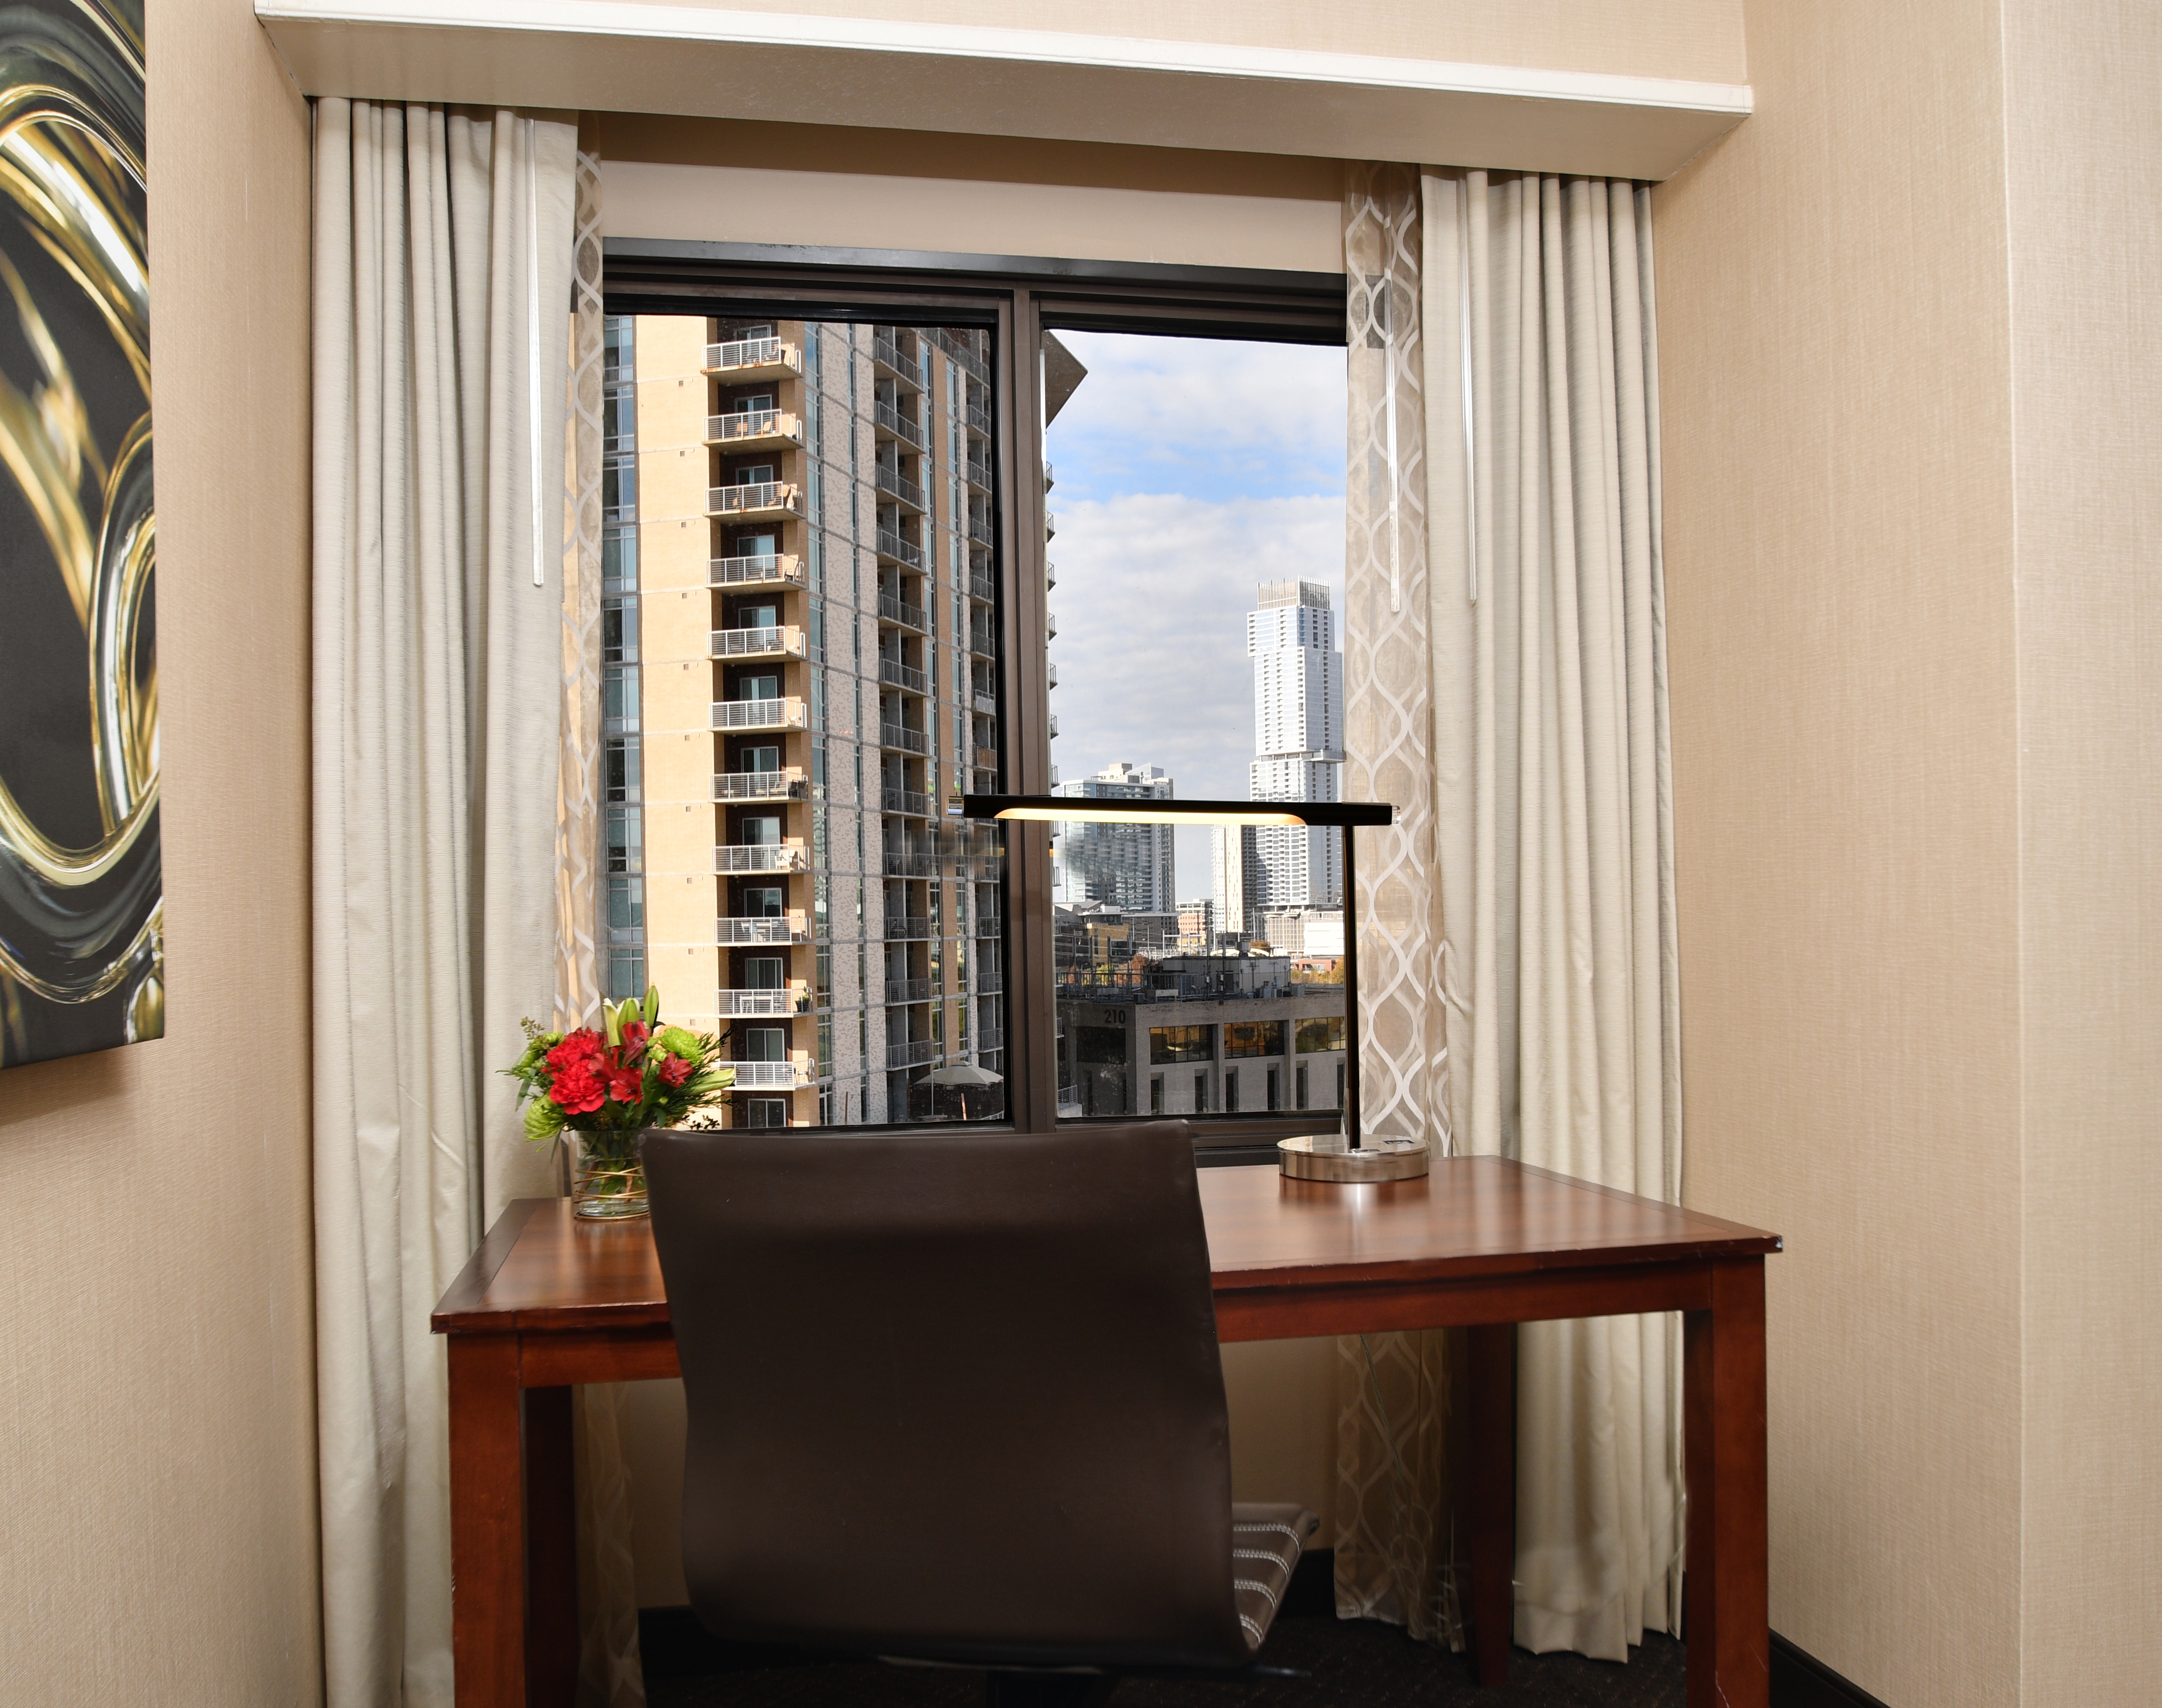 Desk in Front of Window with View of City